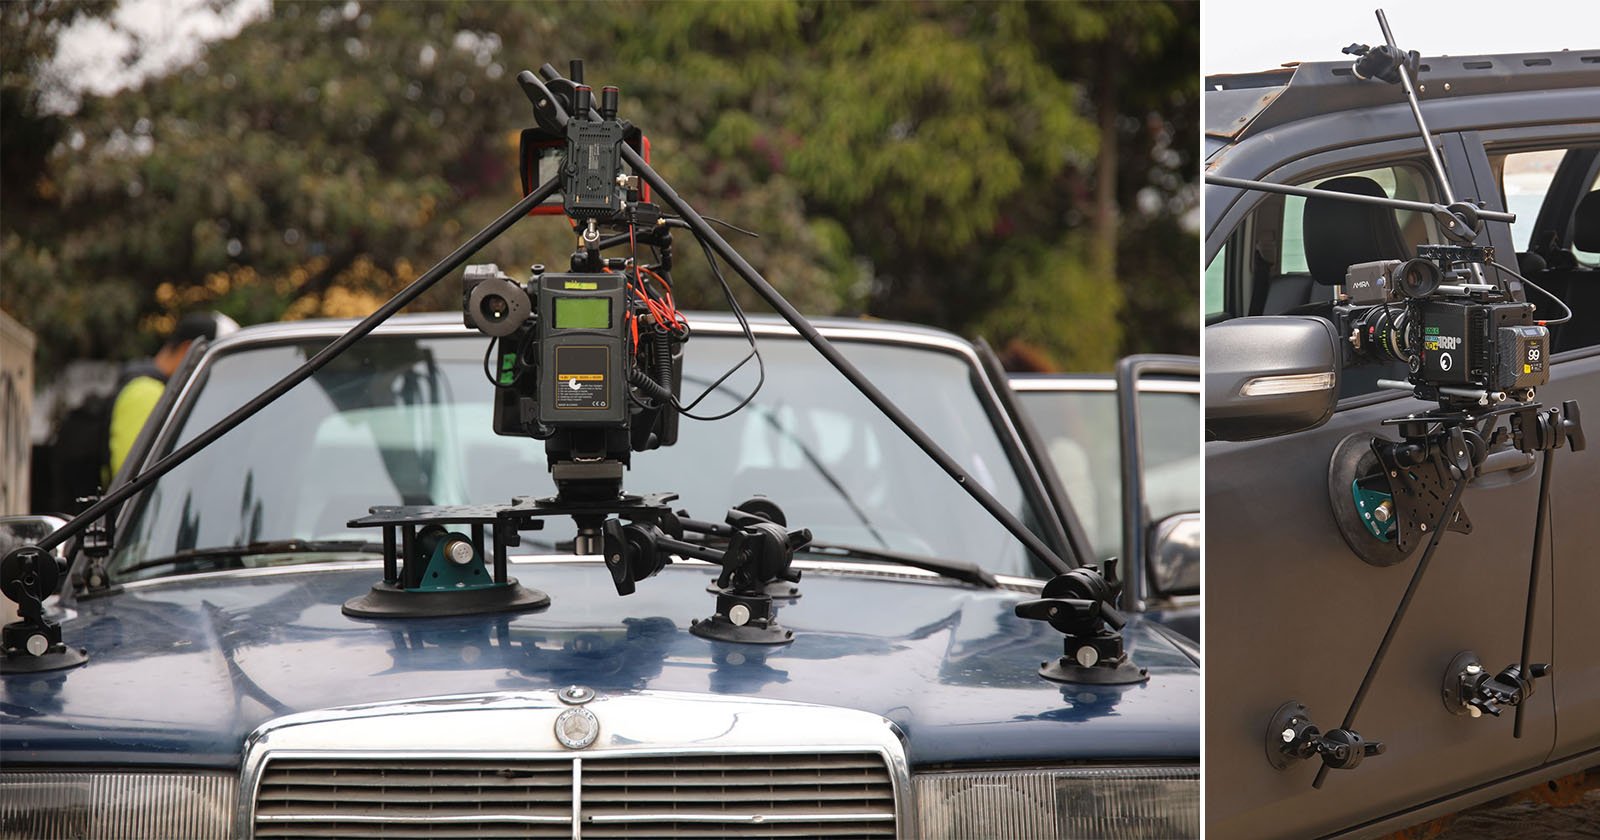 The RigWheels Kraken is an All-in-One Car Mount for Pro Video Production